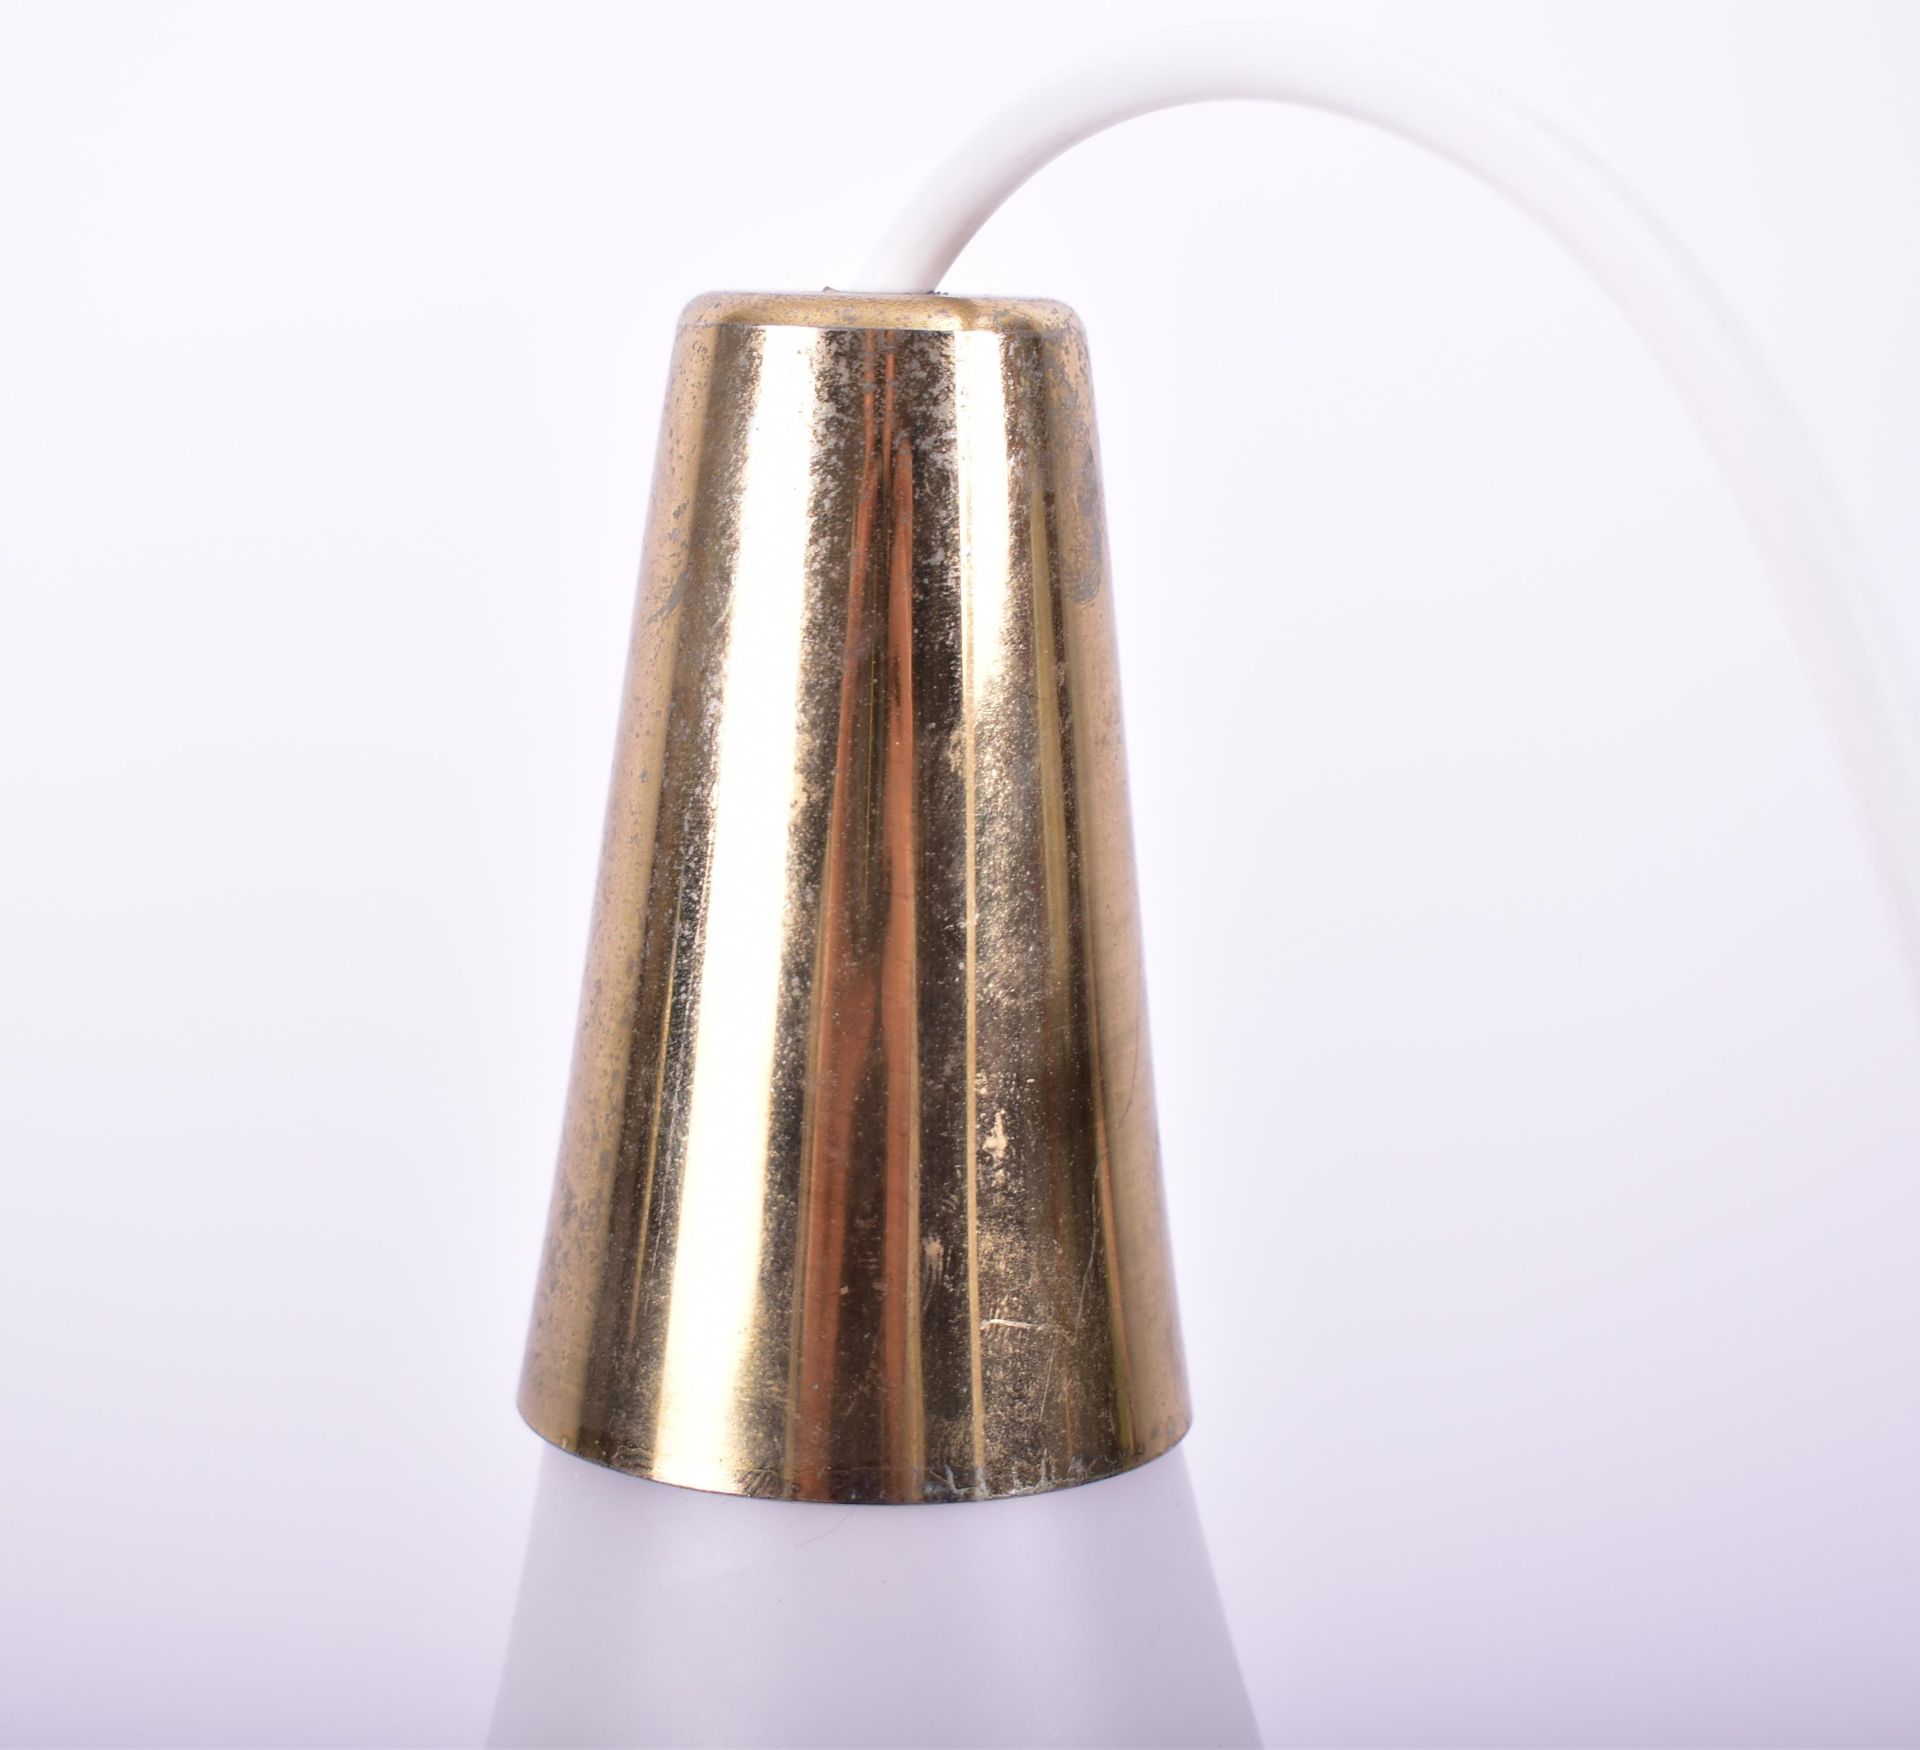 LOUIS POULSEN FOR HOLMEGAARD - MID CENTURY CEILING LIGHT - Image 2 of 5